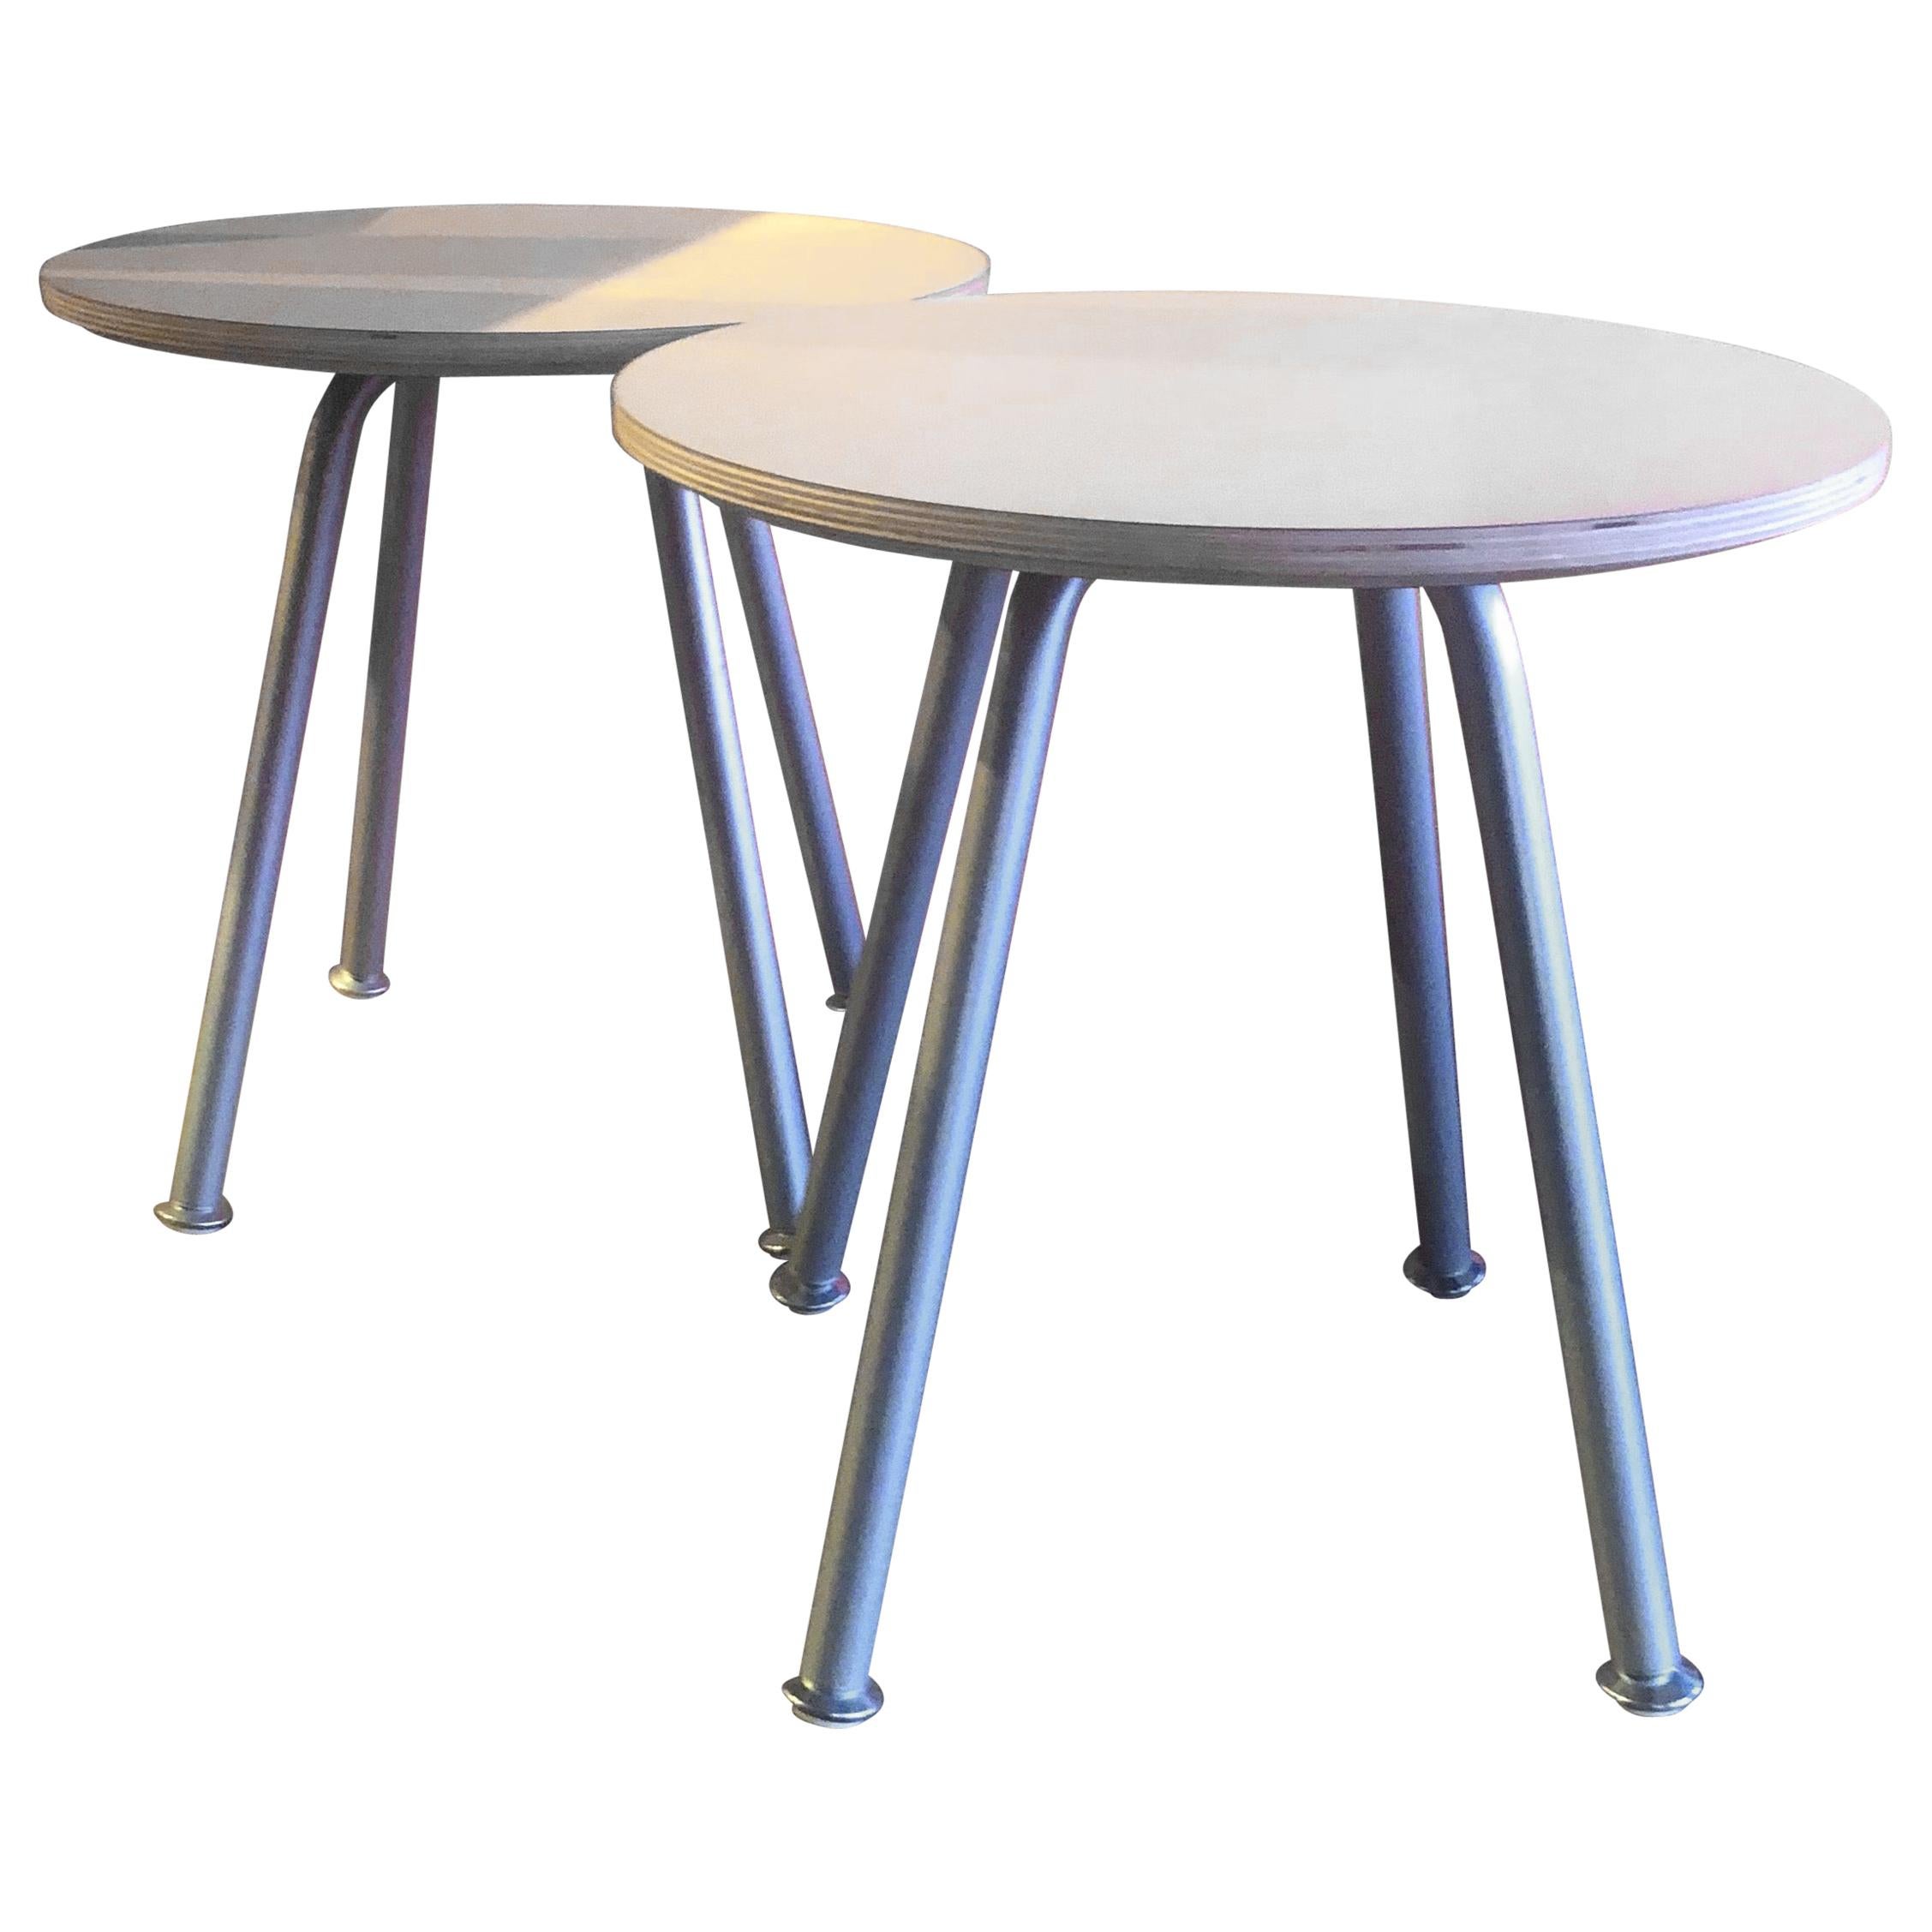 Pair of "Swoop" Tables / Stools by Brian Kane for Herman Miller